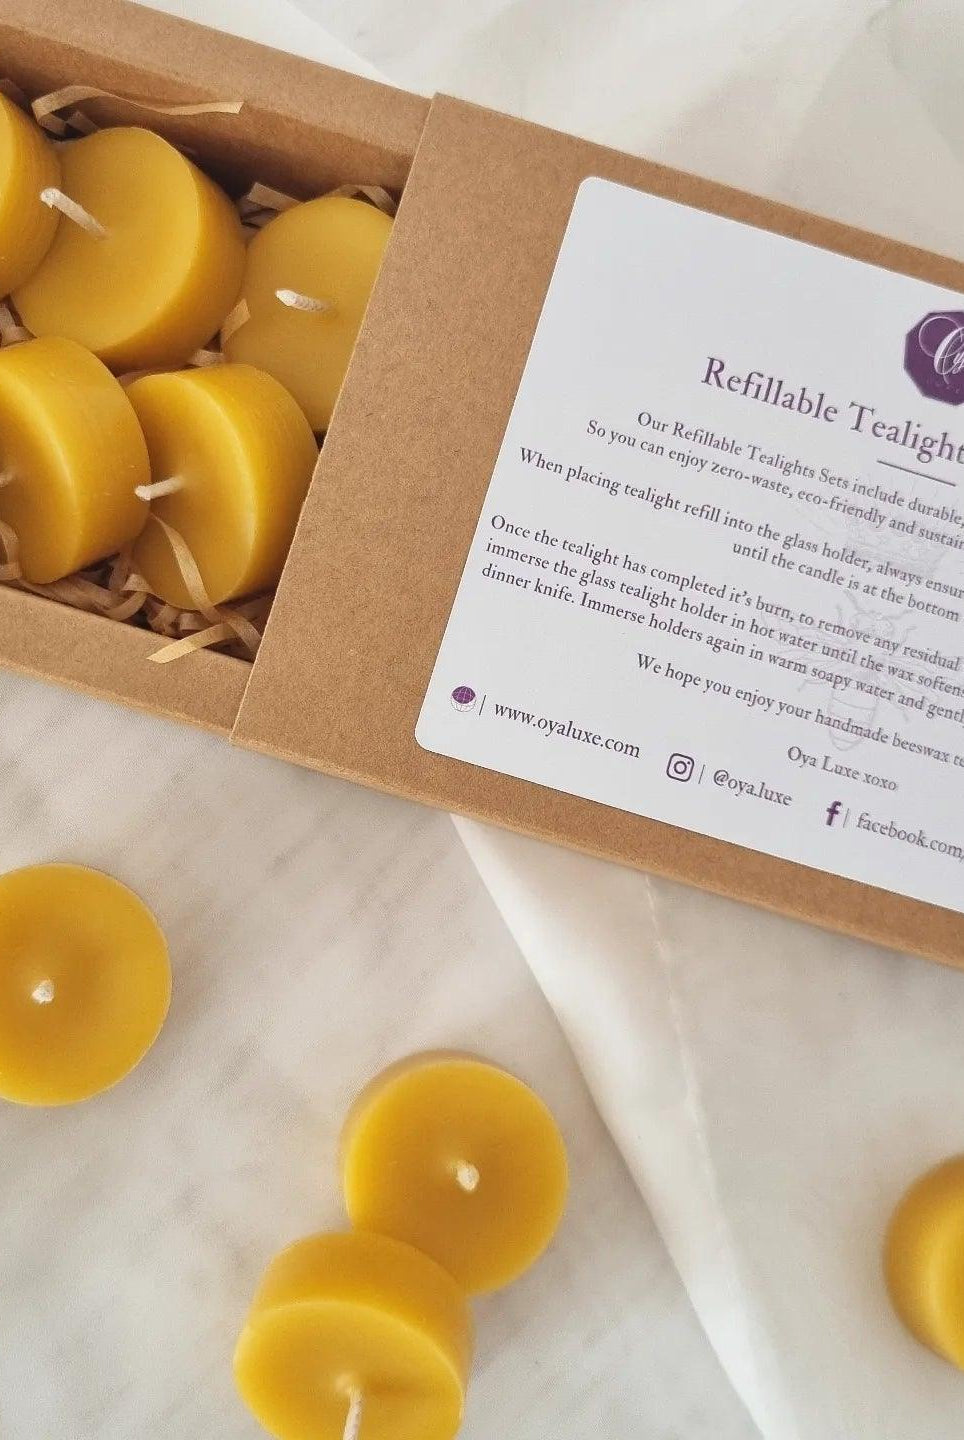 Glass Tealight Refills (10 pure beeswax tealight candles) - Soulshinecreators - beeswax candles